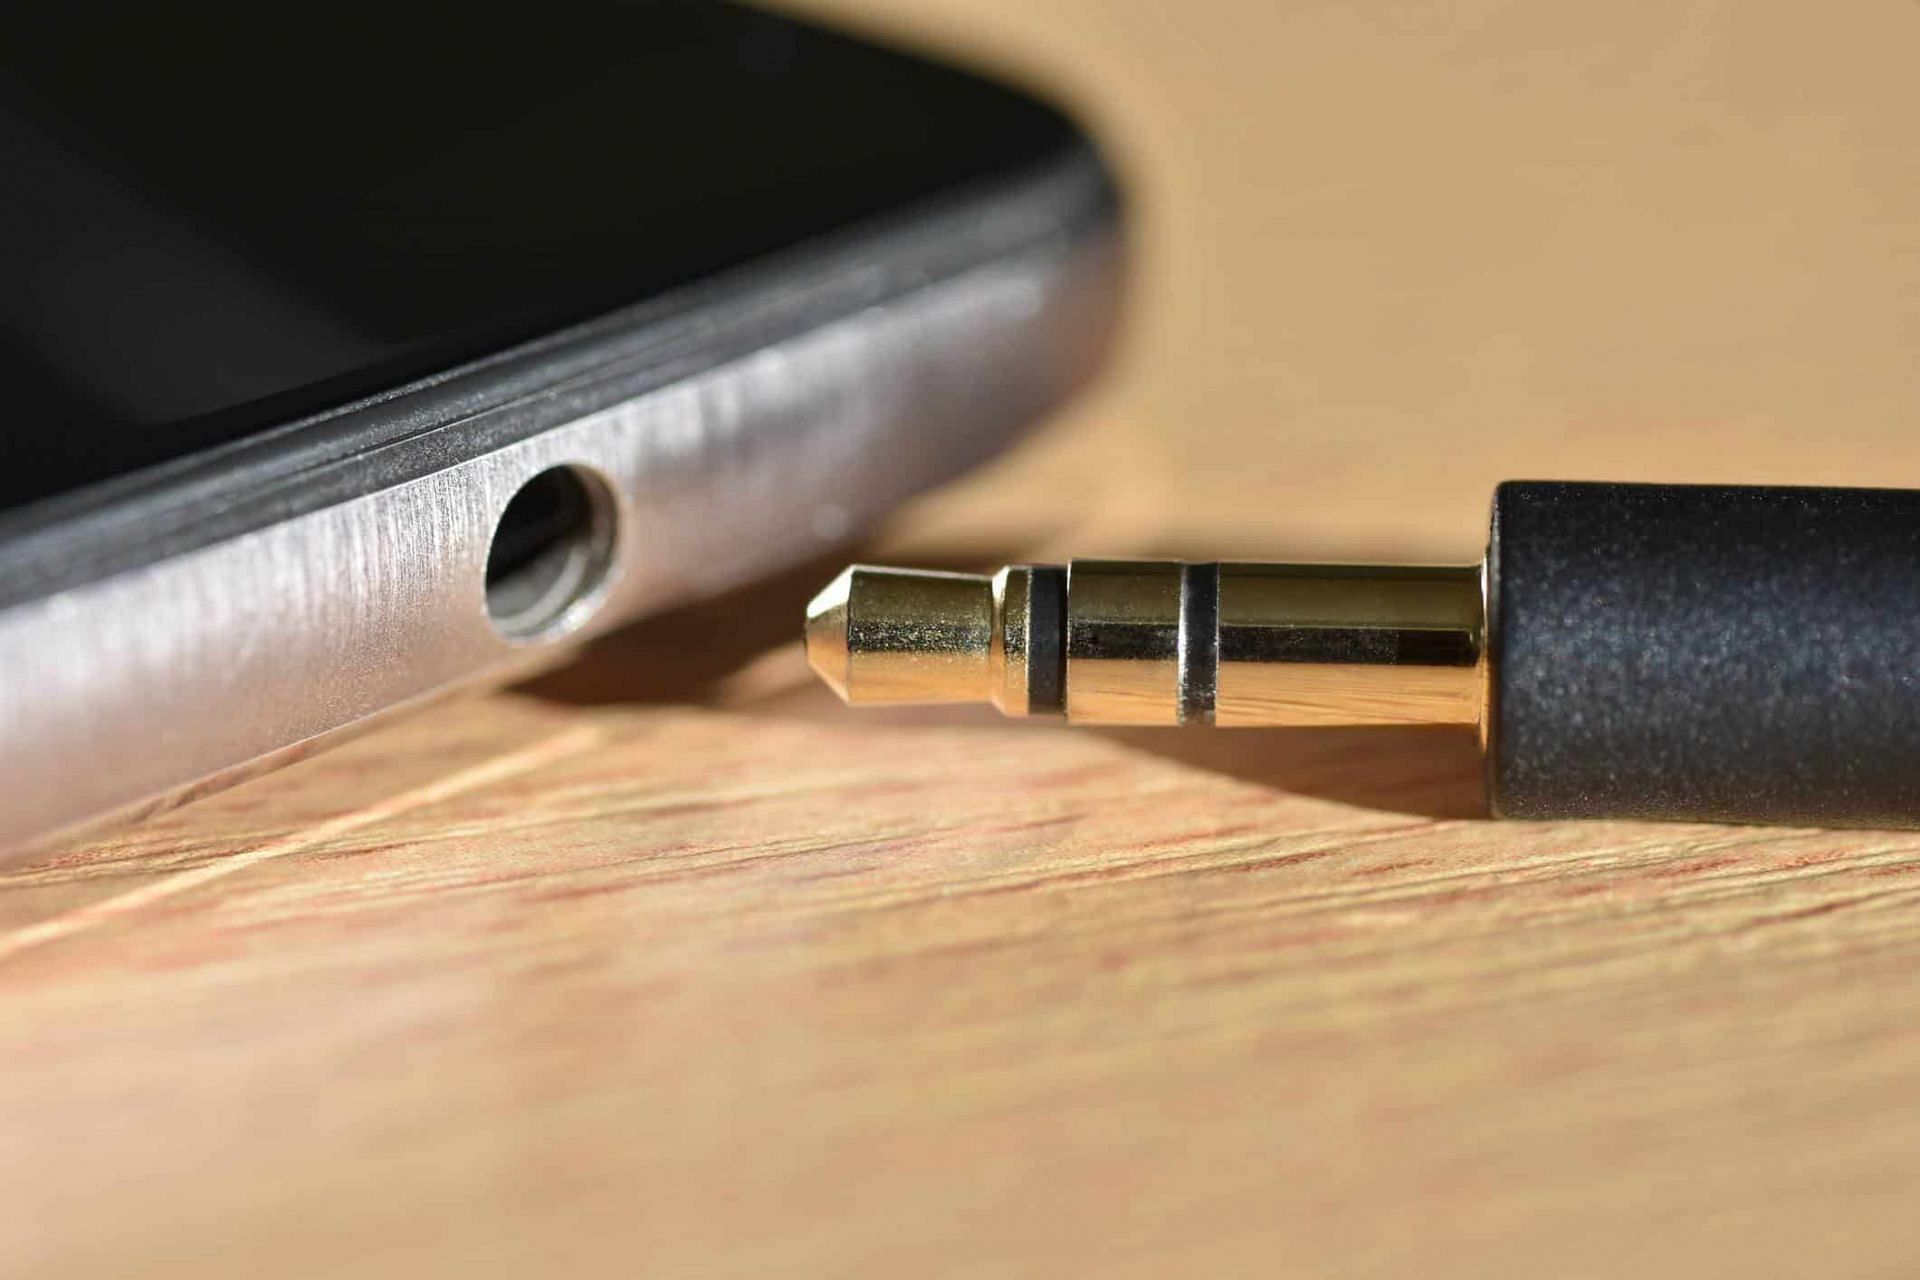 5 best Android phones with headphone jack in 2022. Image Via Oscarmini